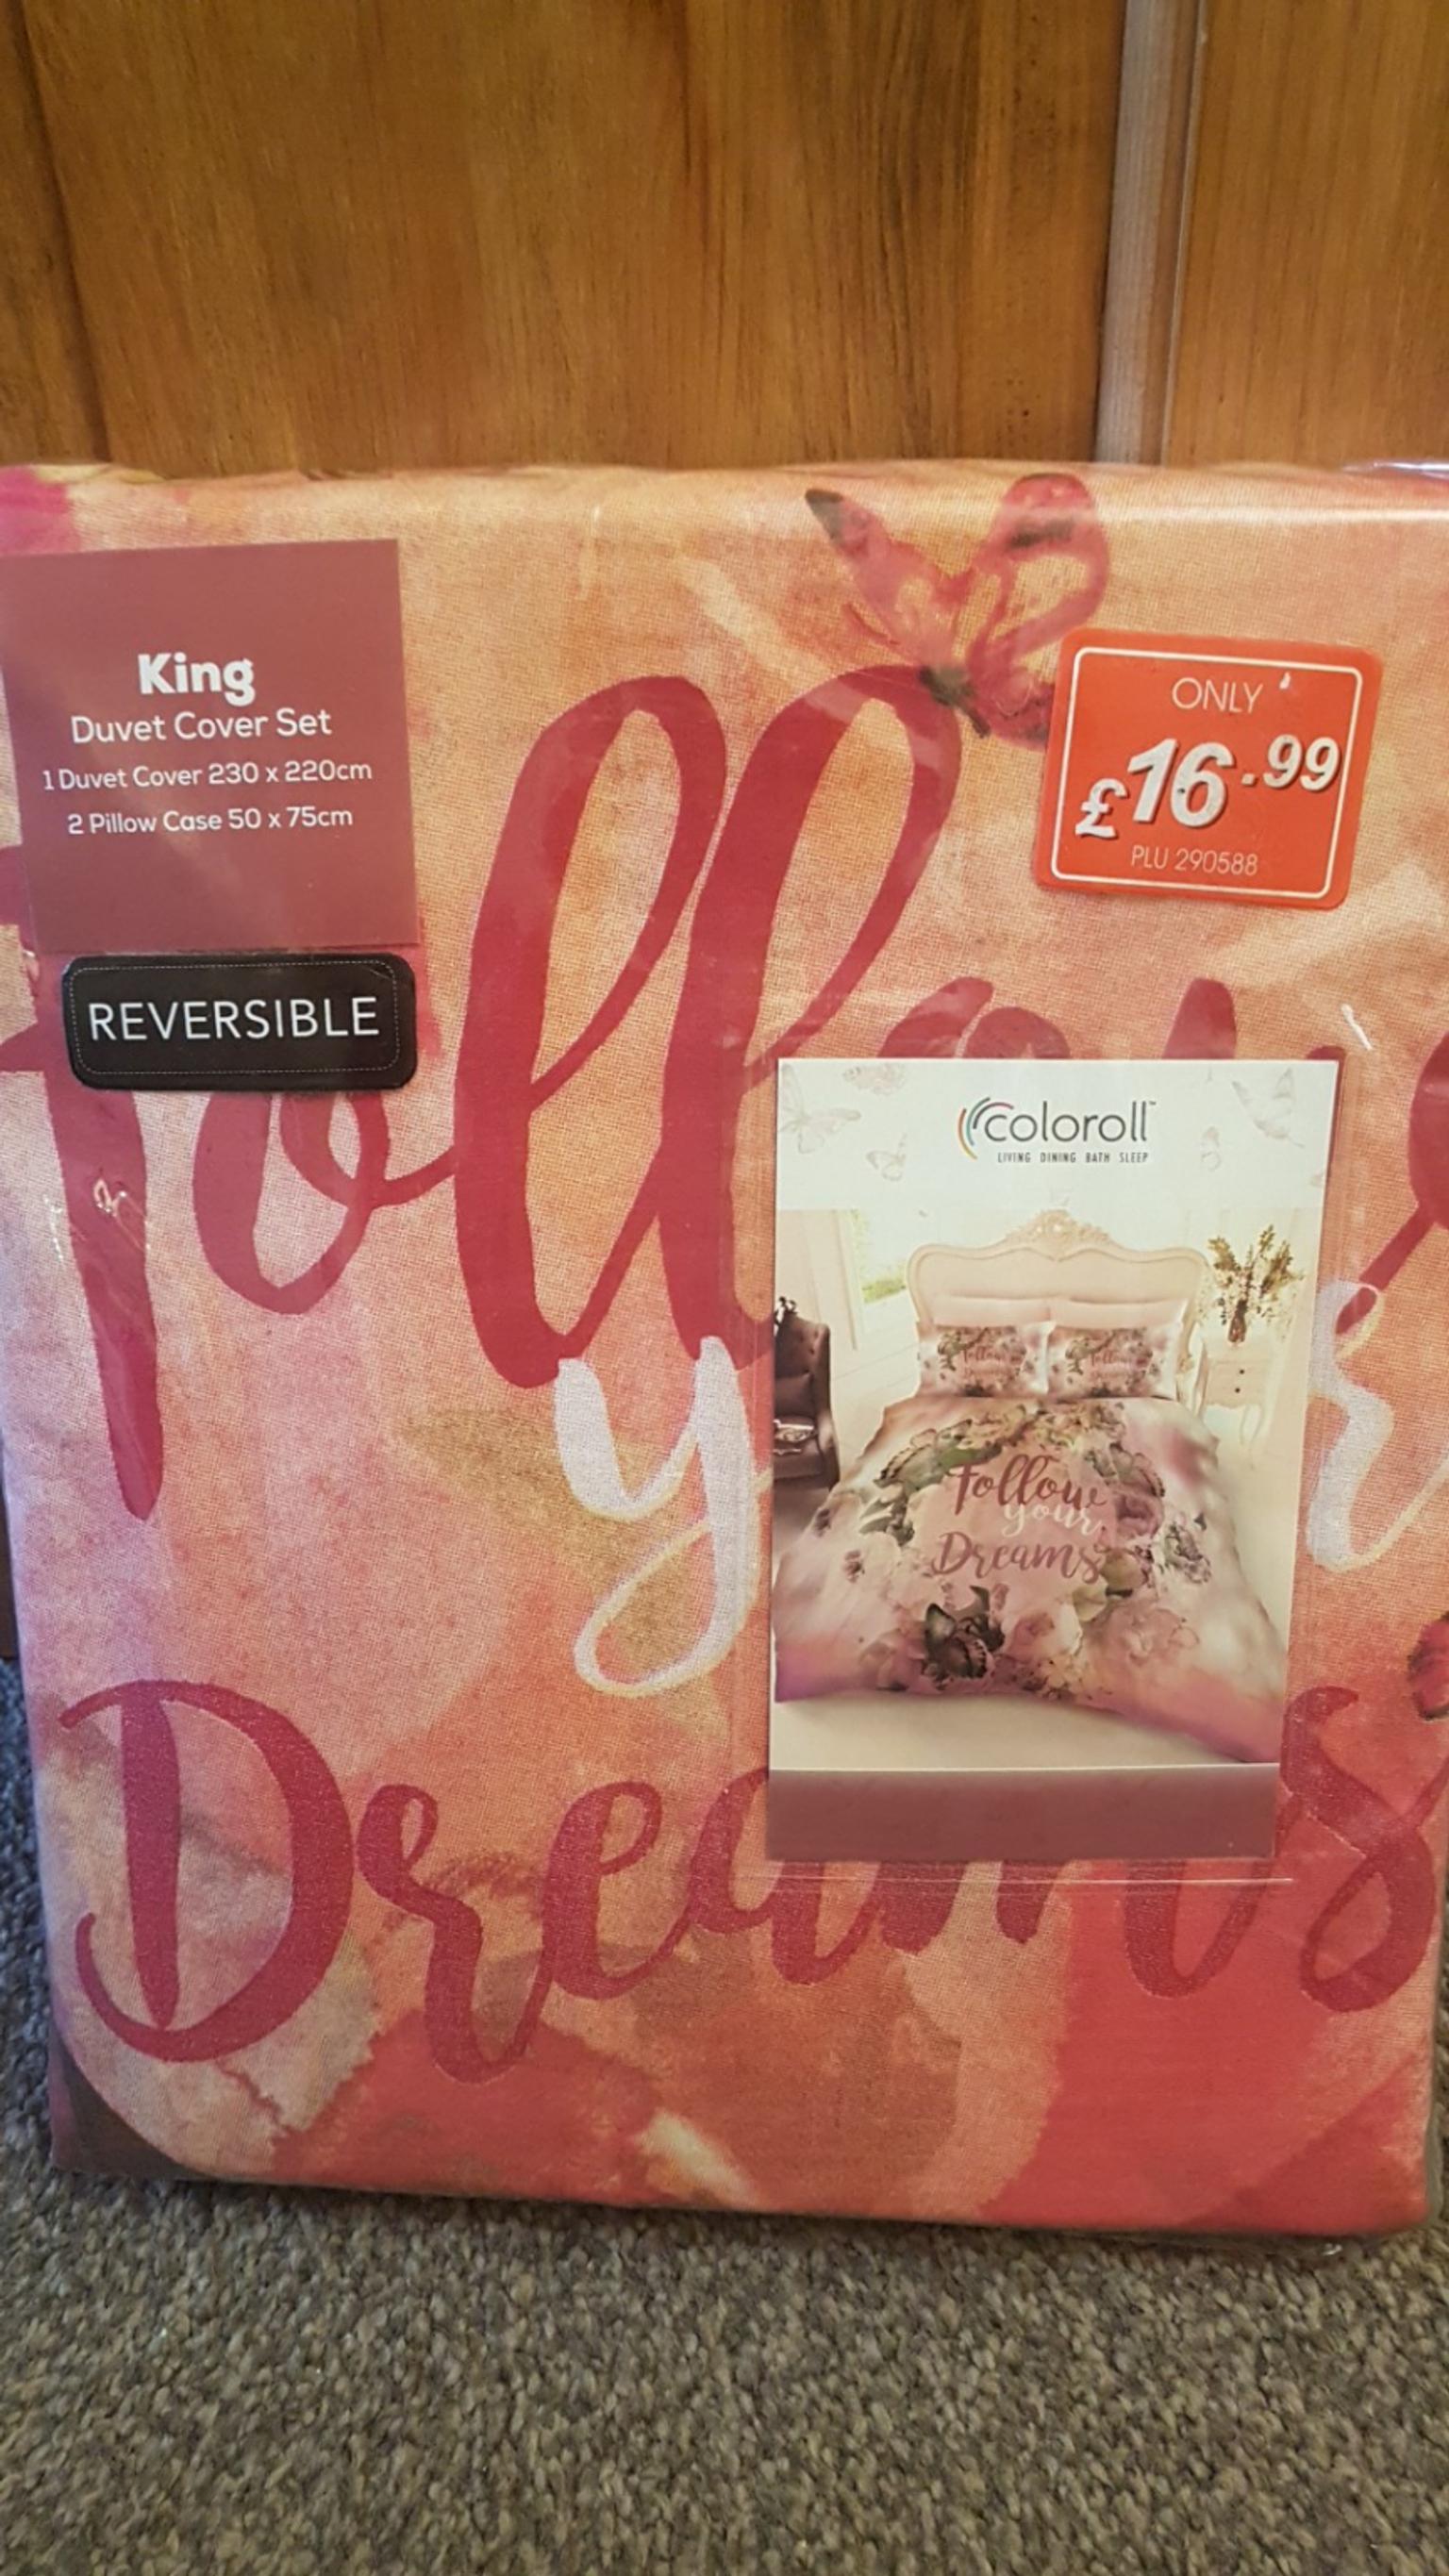 Coloroll King Size Duvet Cover Set New In Wf7 Wakefield For 7 00